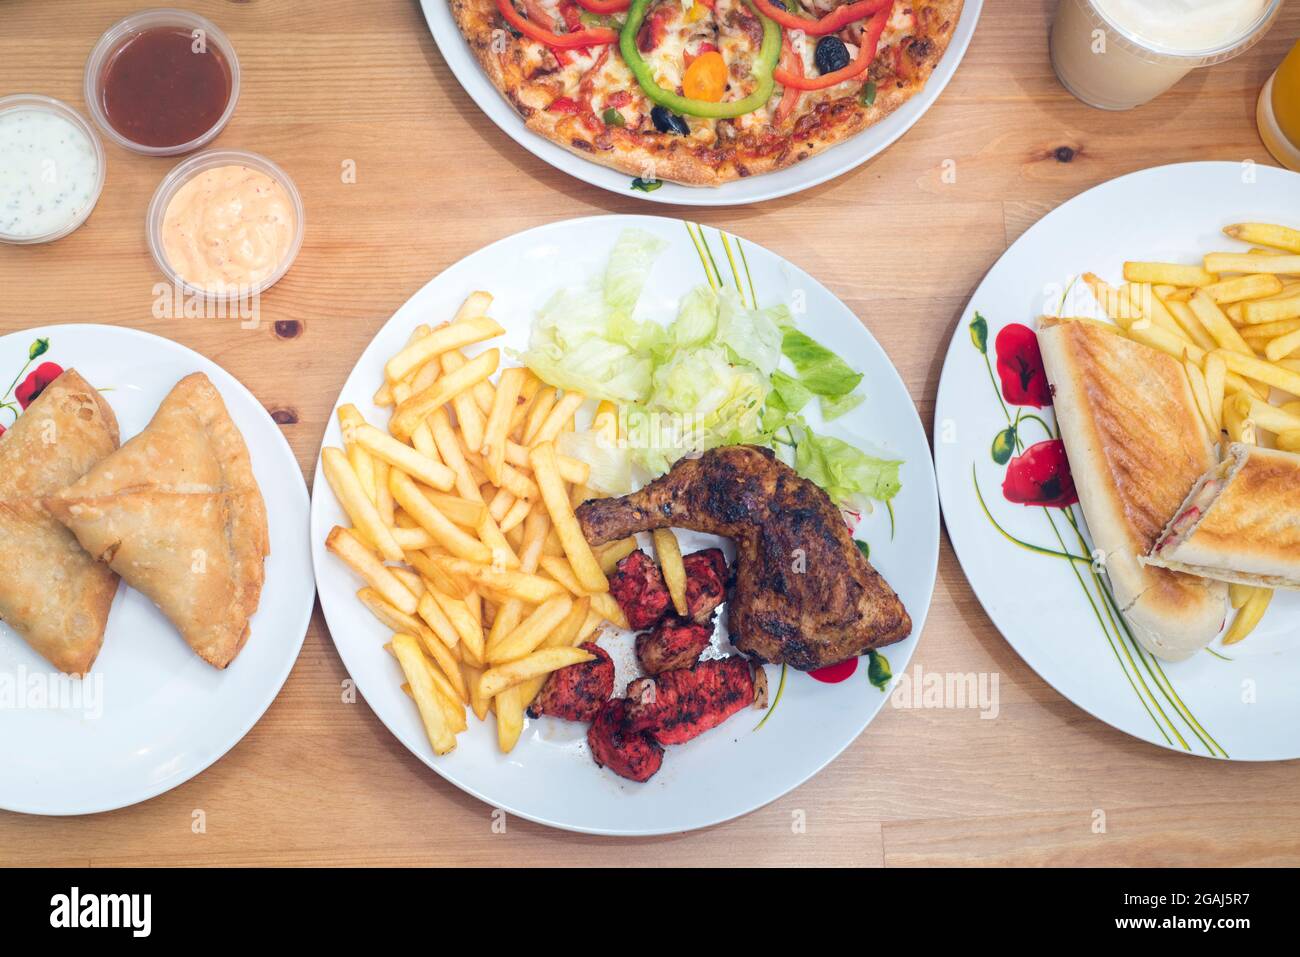 Tandoori chicken with chips and salad, samosas, chicken tikka panini, pizza with dips and drinks Stock Photo